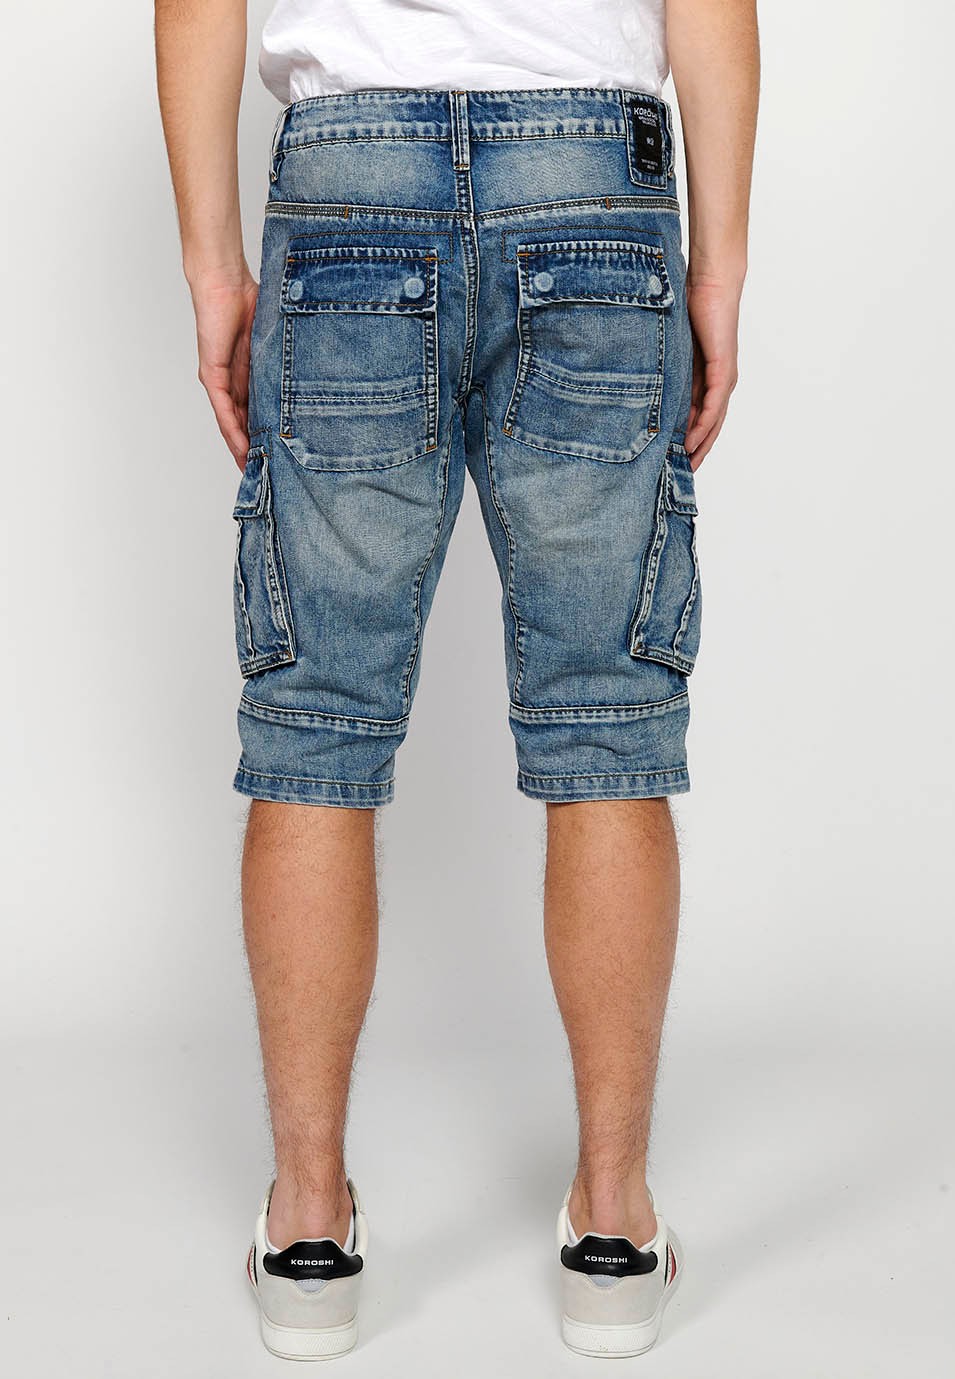 Denim Bermuda cargo shorts with front zipper and button closure with five pockets, one ticket pocket and two light blue sides, for Men 4